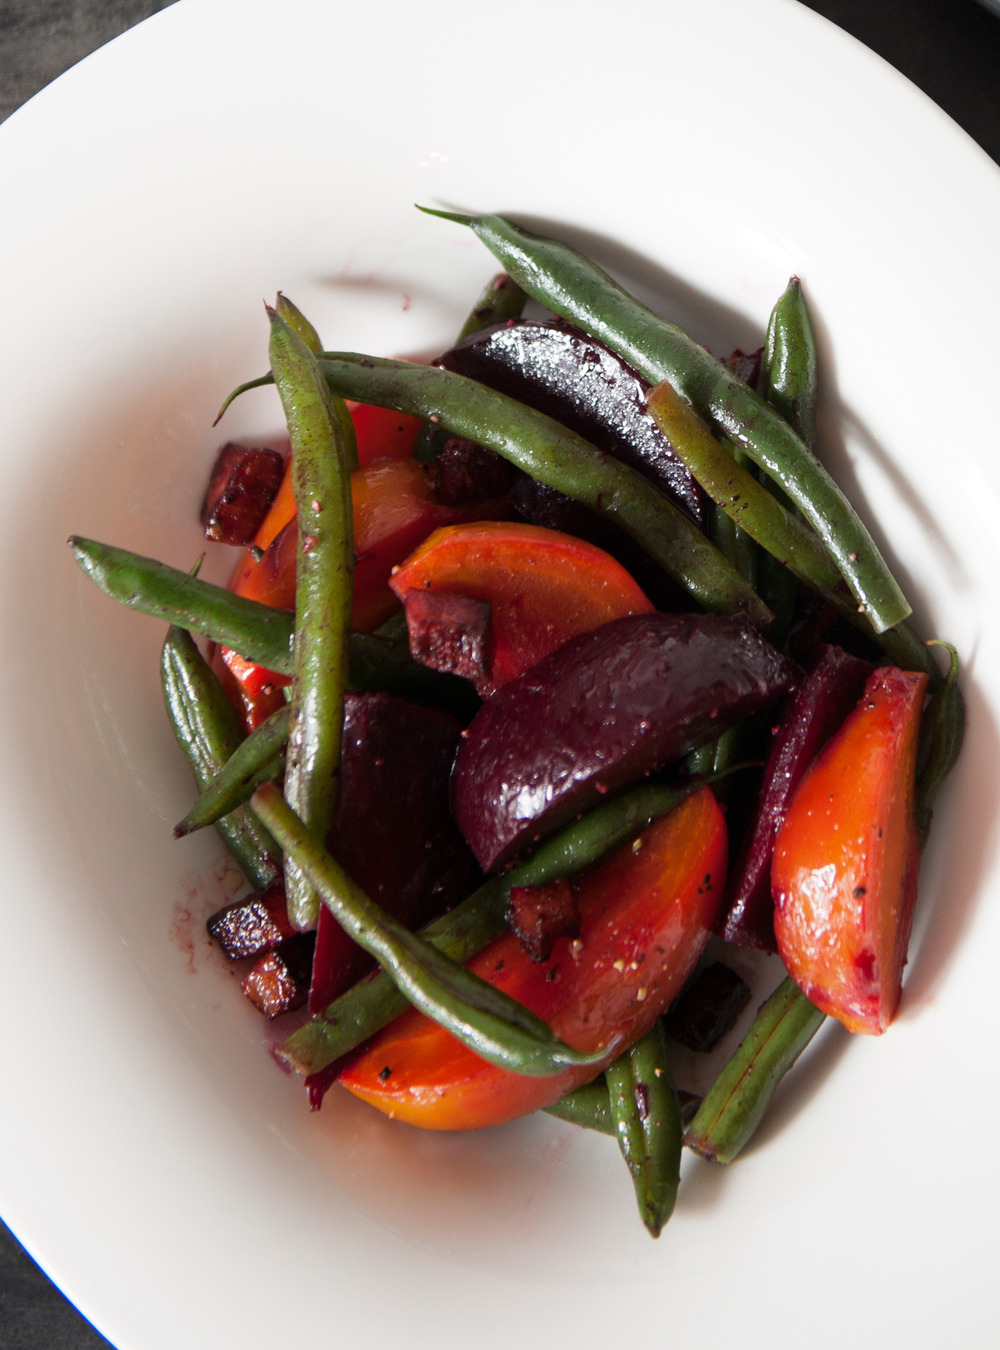 Warm Beet Salad with Bacon and Green Beans